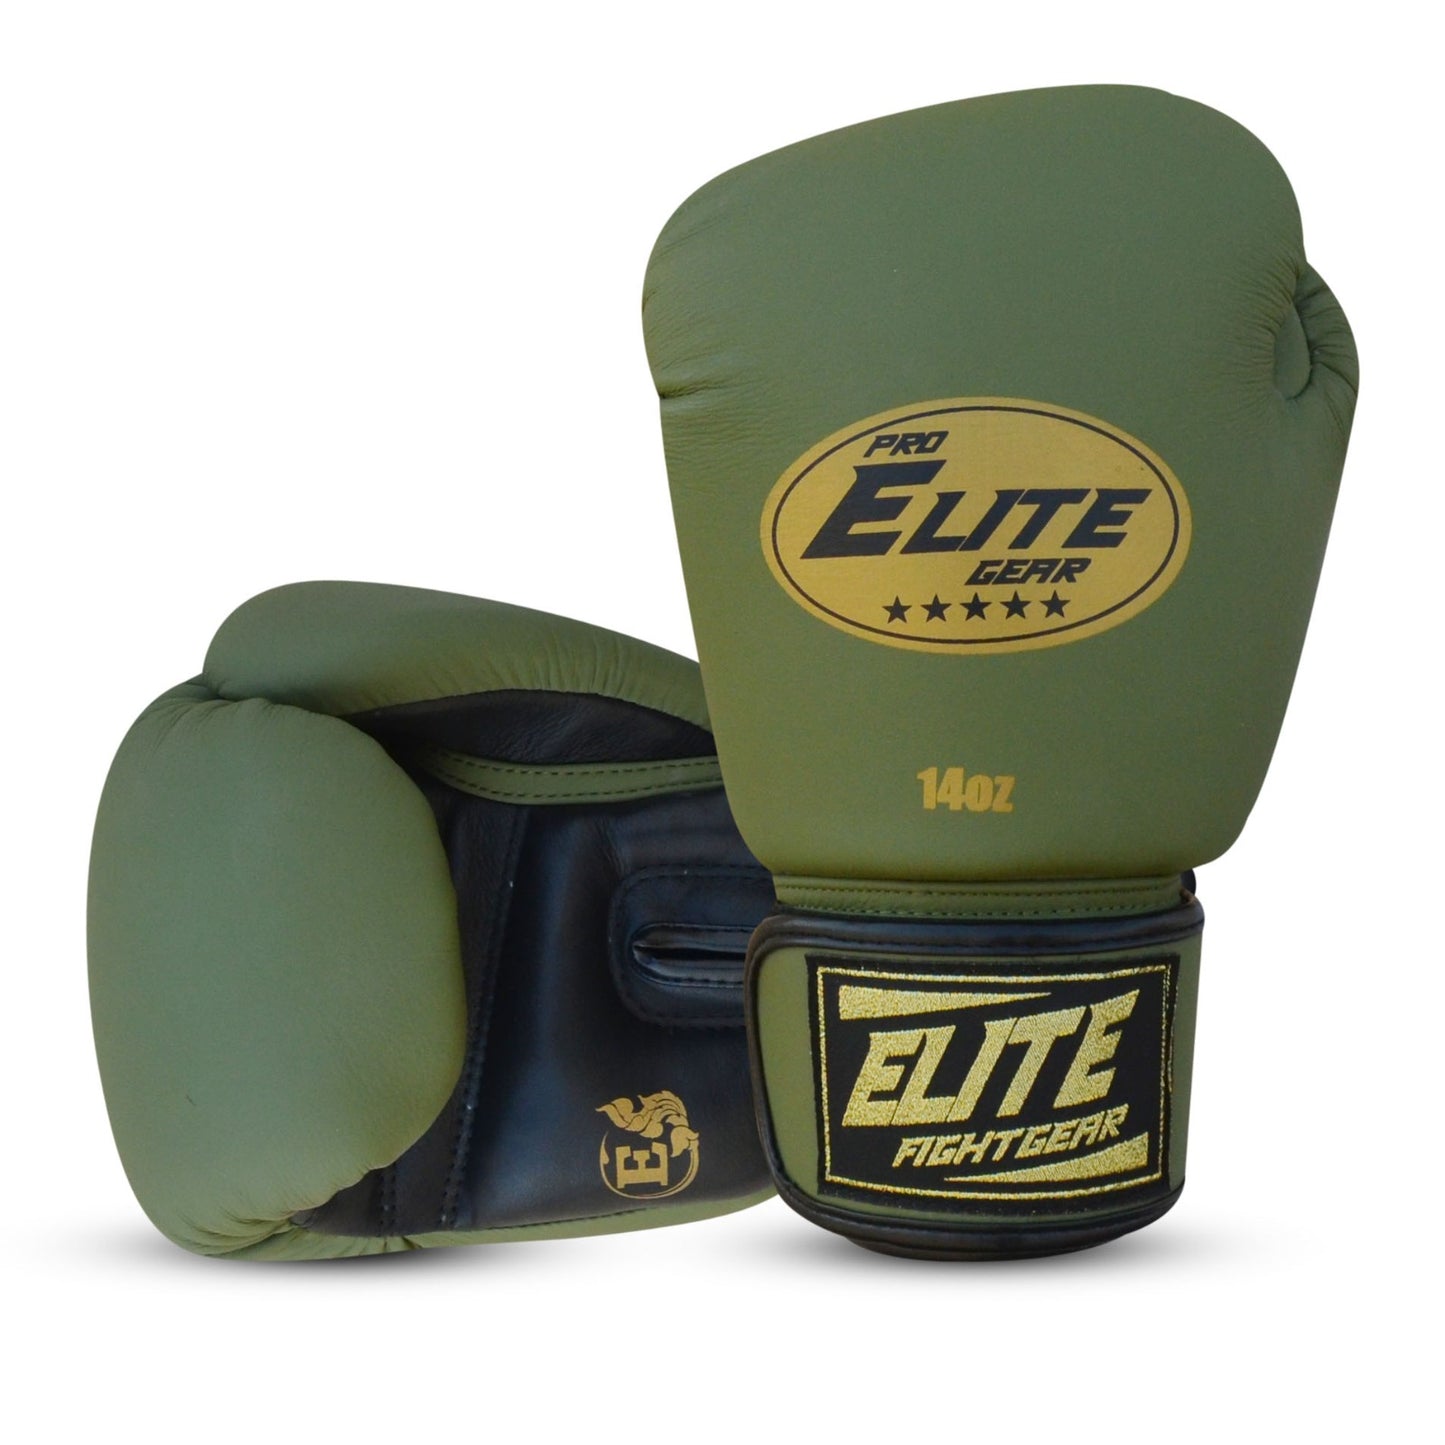 Coban Army Green Boxing Gloves